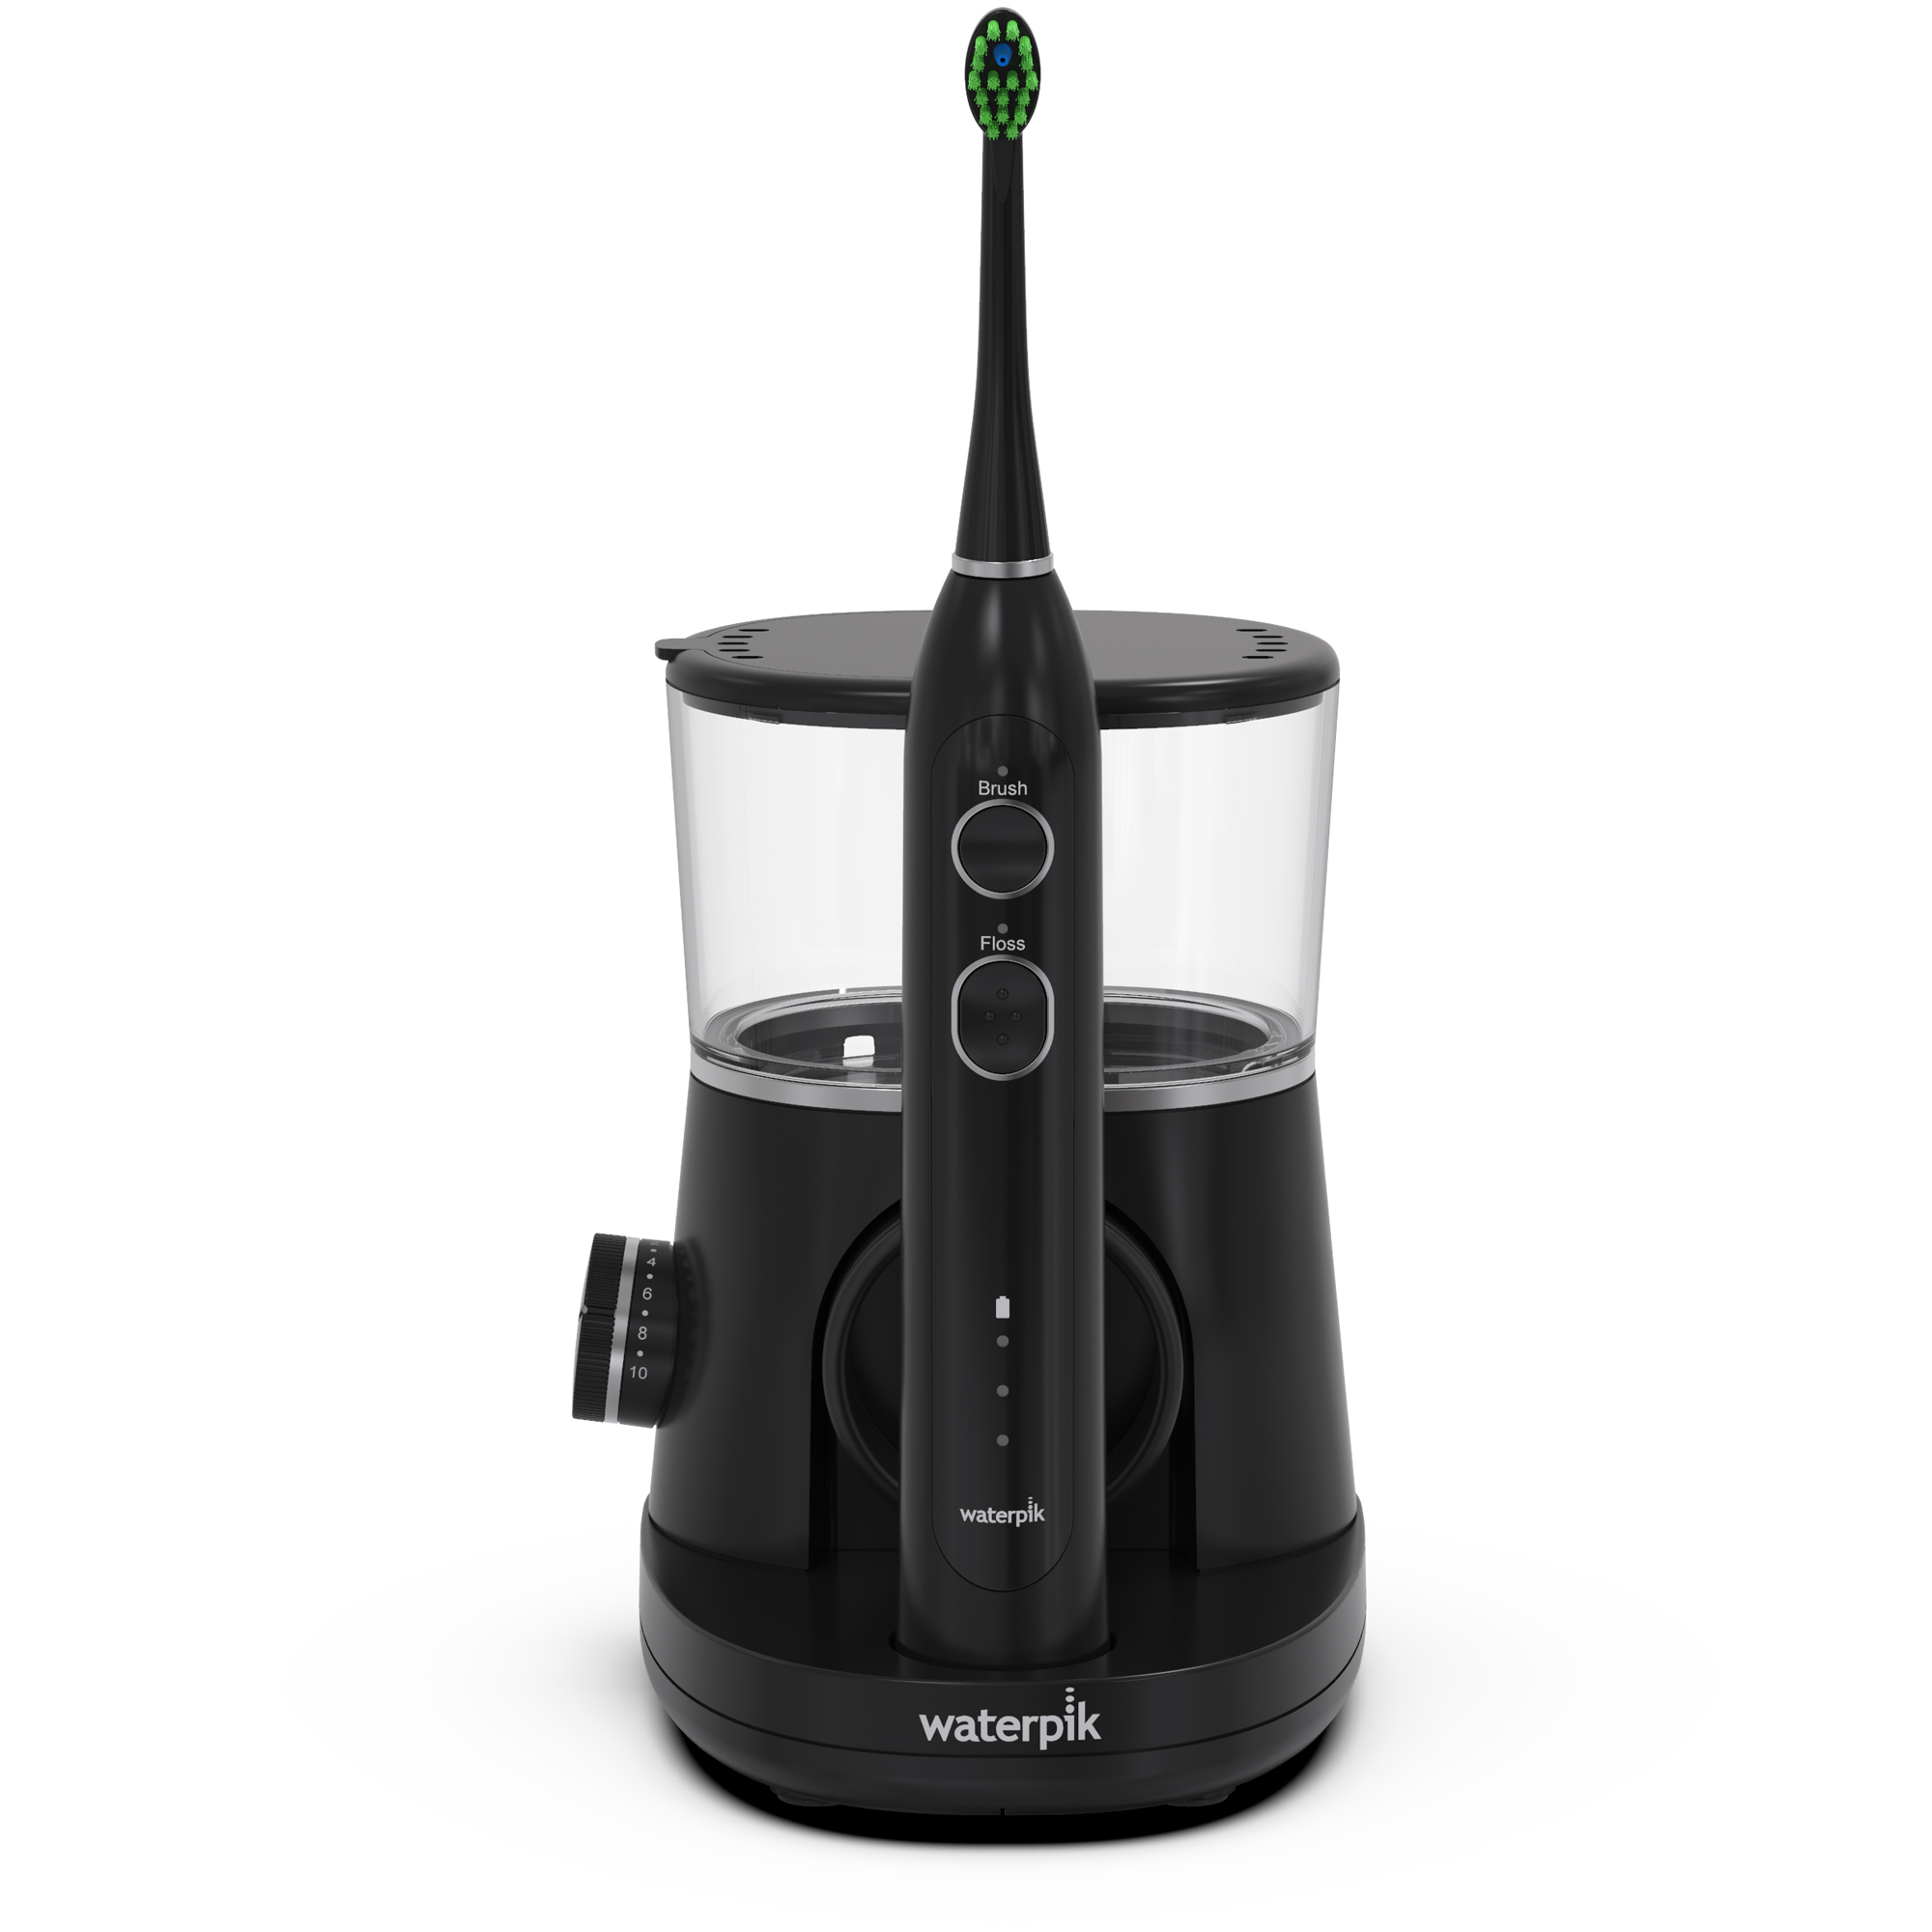 Waterpik Sonic-Fusion 2.0 Flossing Toothbrush, Electric Toothbrush & Water Flosser Combo, Black - image 1 of 13